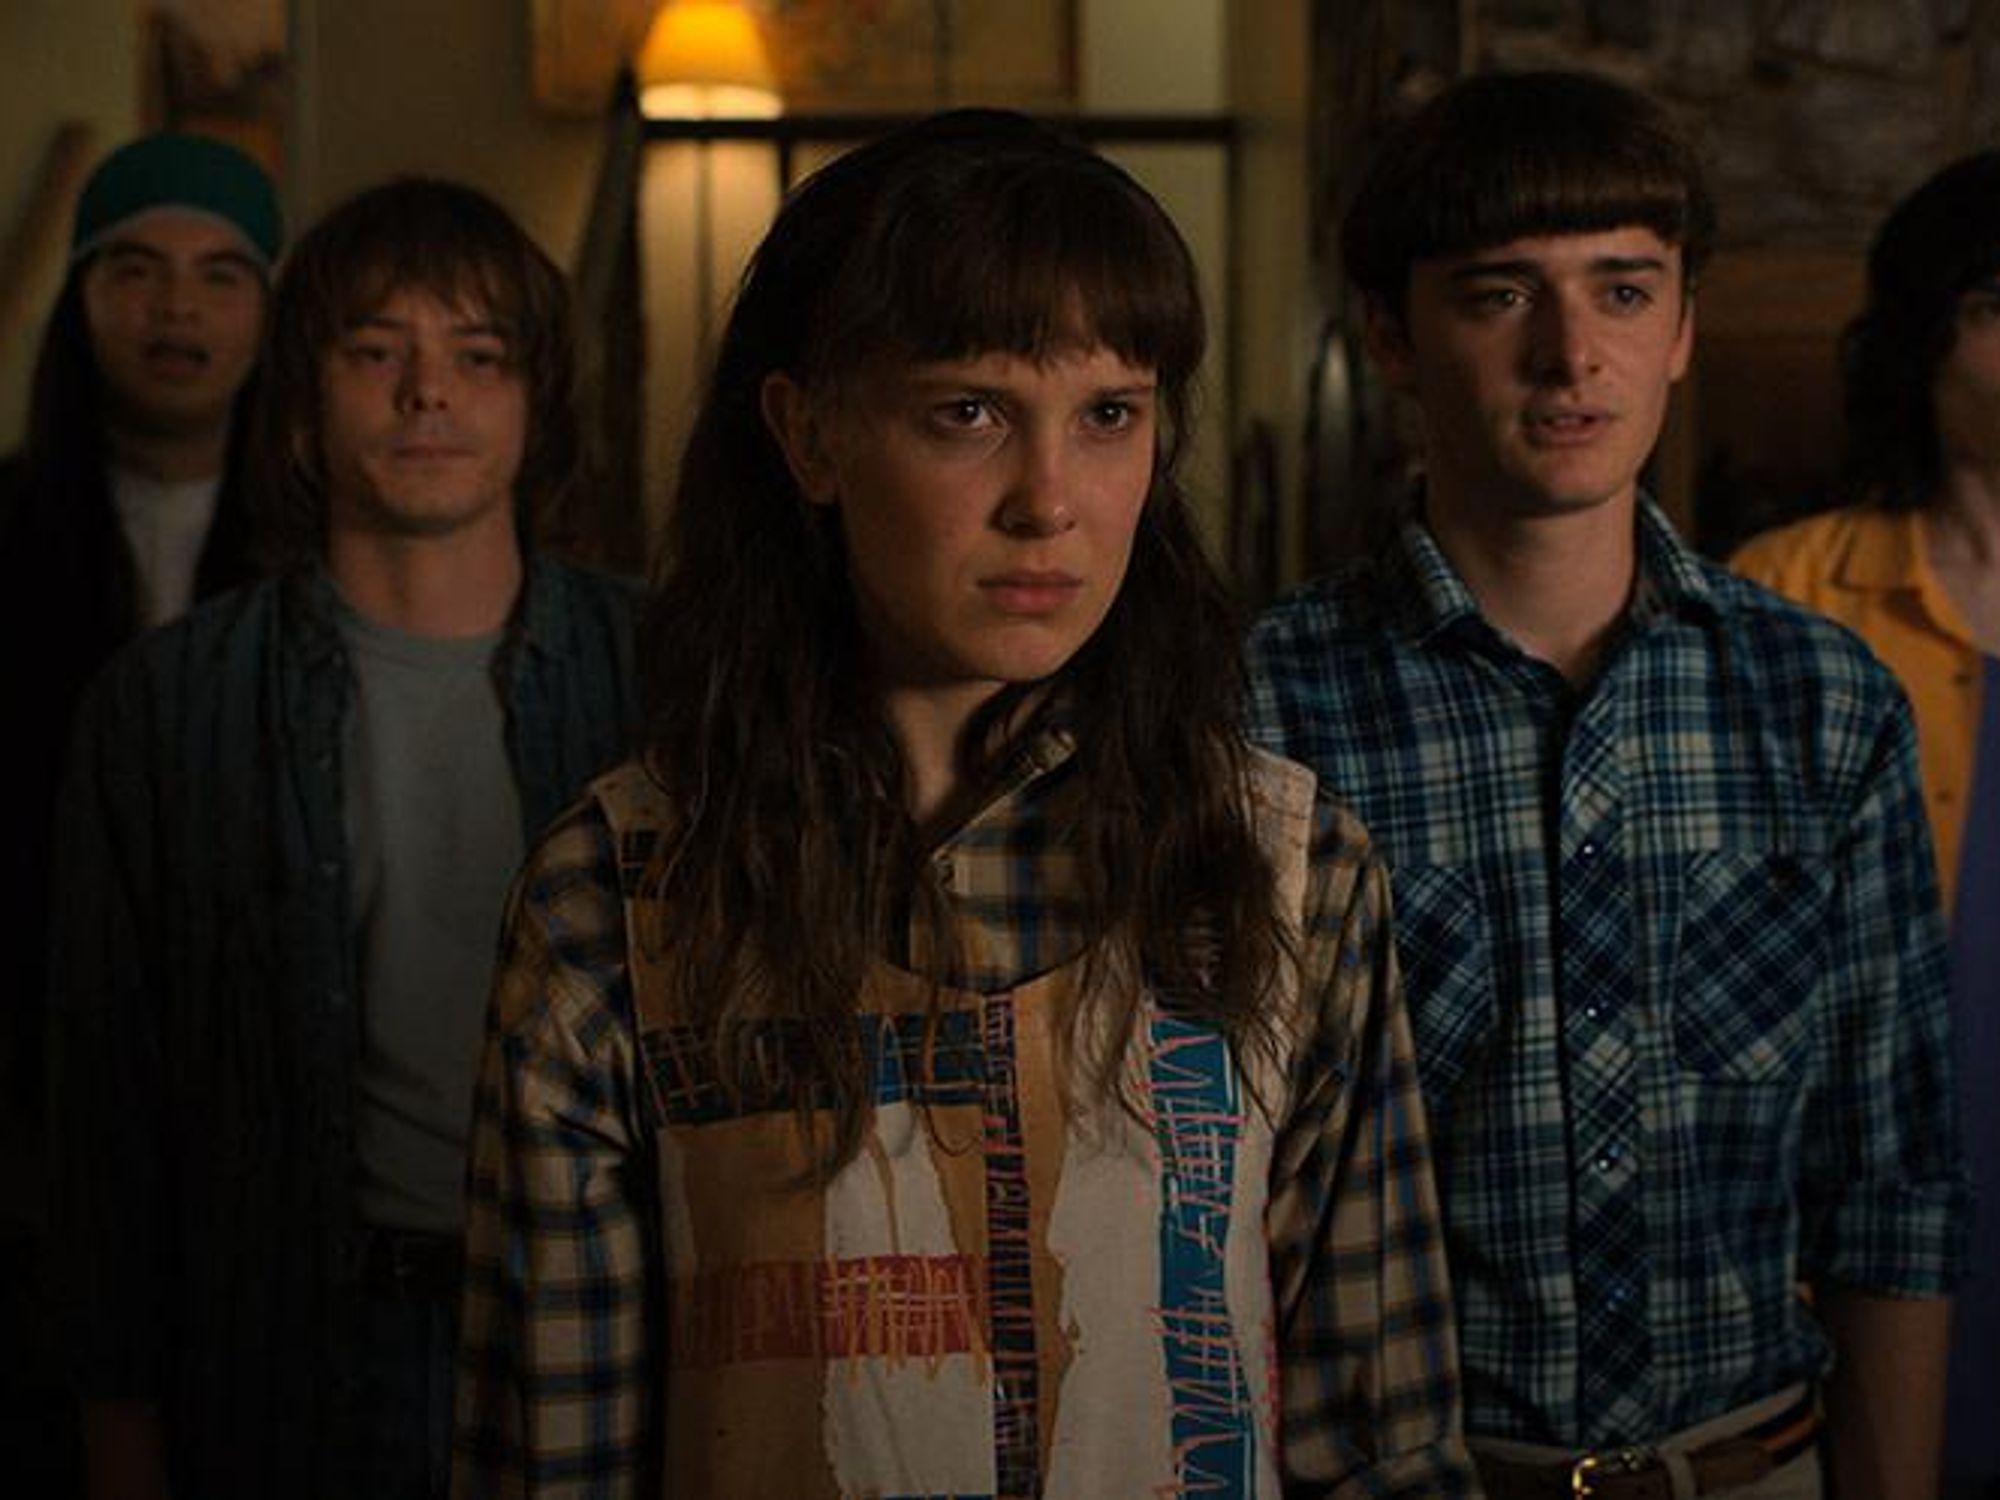 ‘Stranger Things’ Gives Netflix a Much-Needed Boost